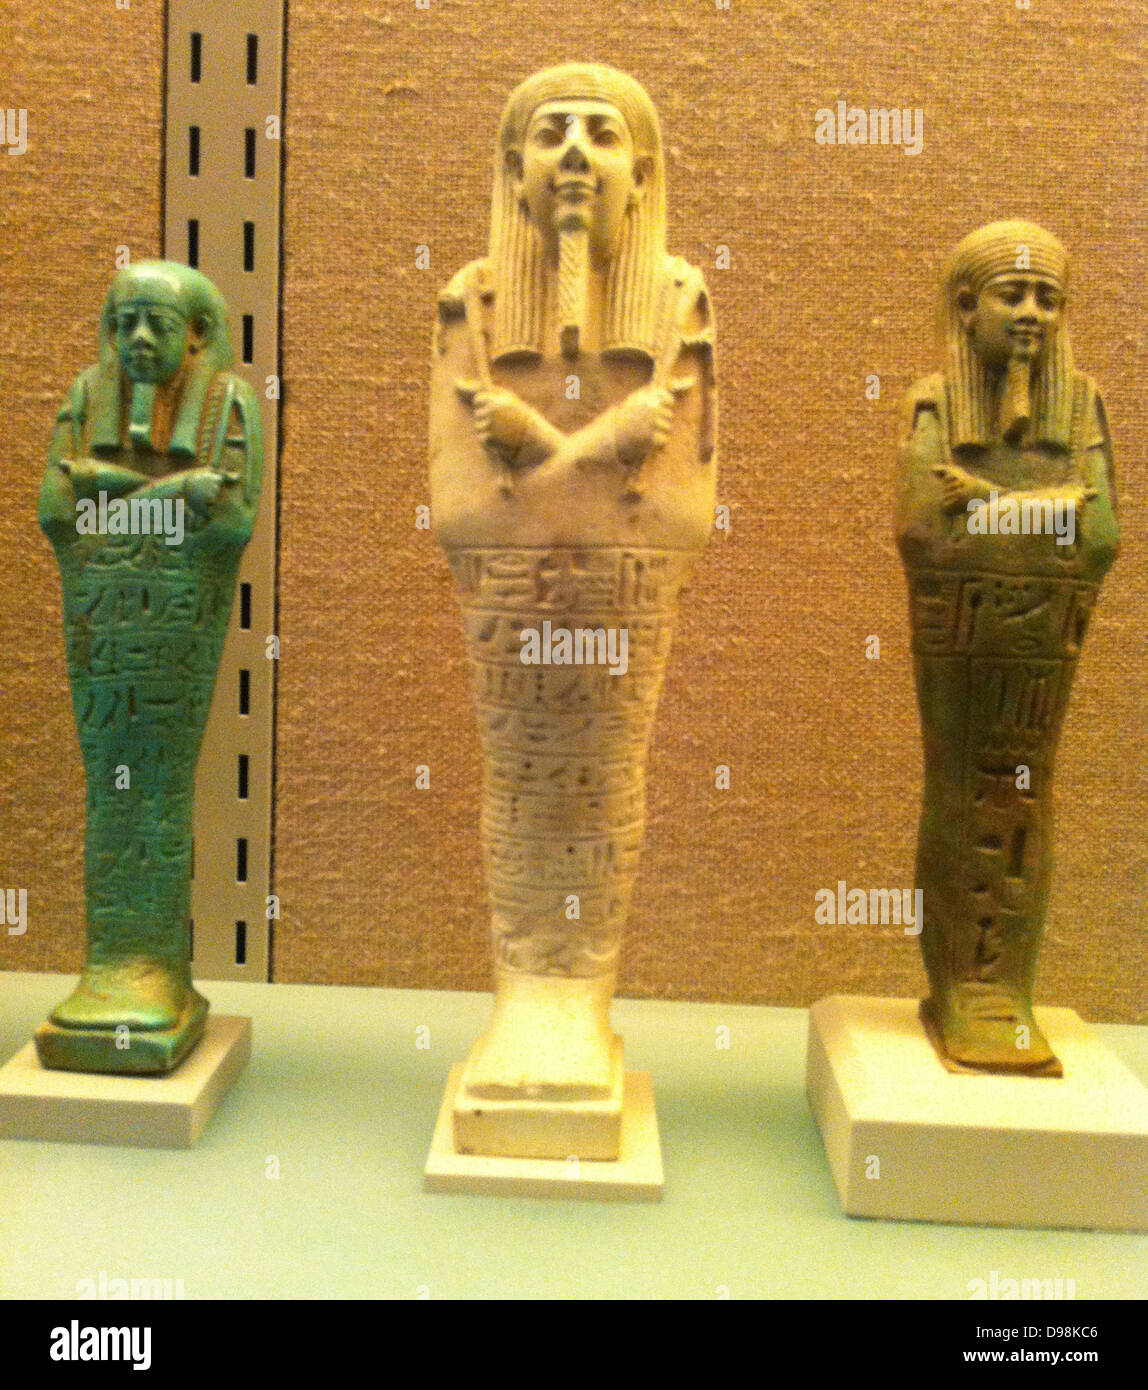 Shawabtis from the tomb of a courtier found at Sakkara. 26th Dynasty 570 - 526 BC. Stock Photo